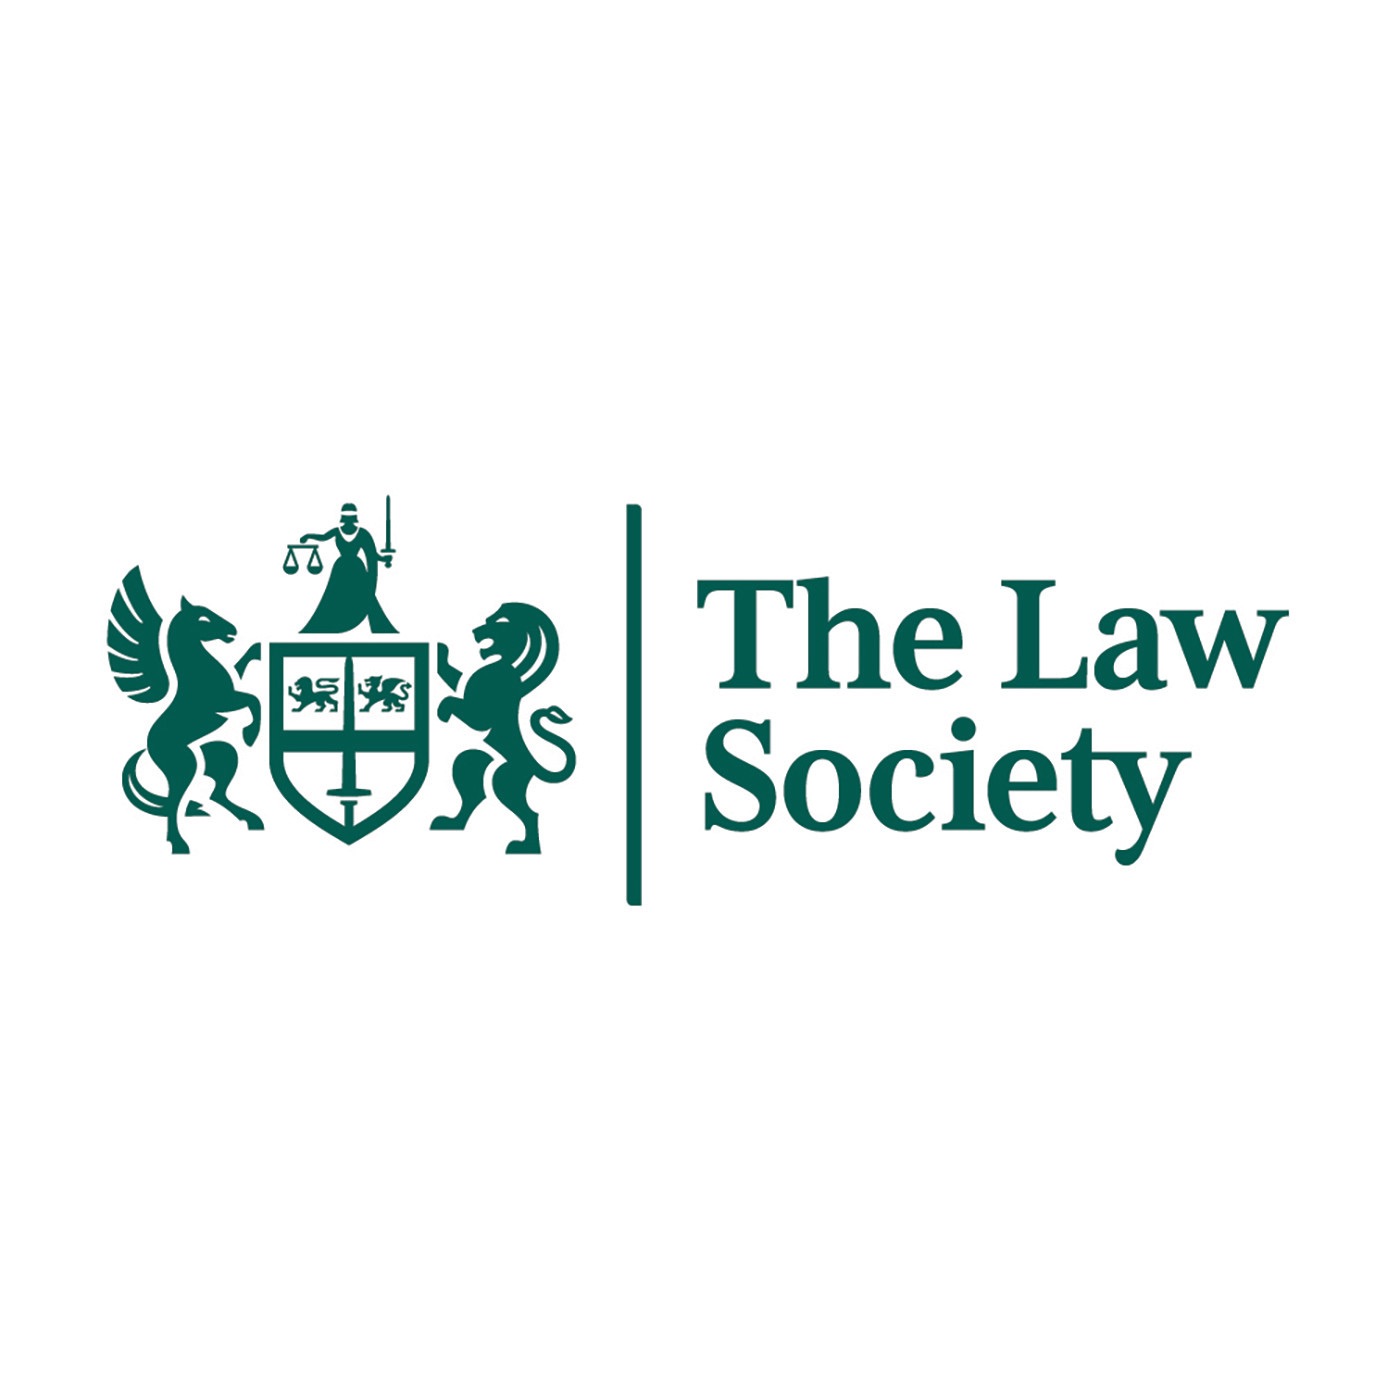 Law and society. Understanding Law and Society.